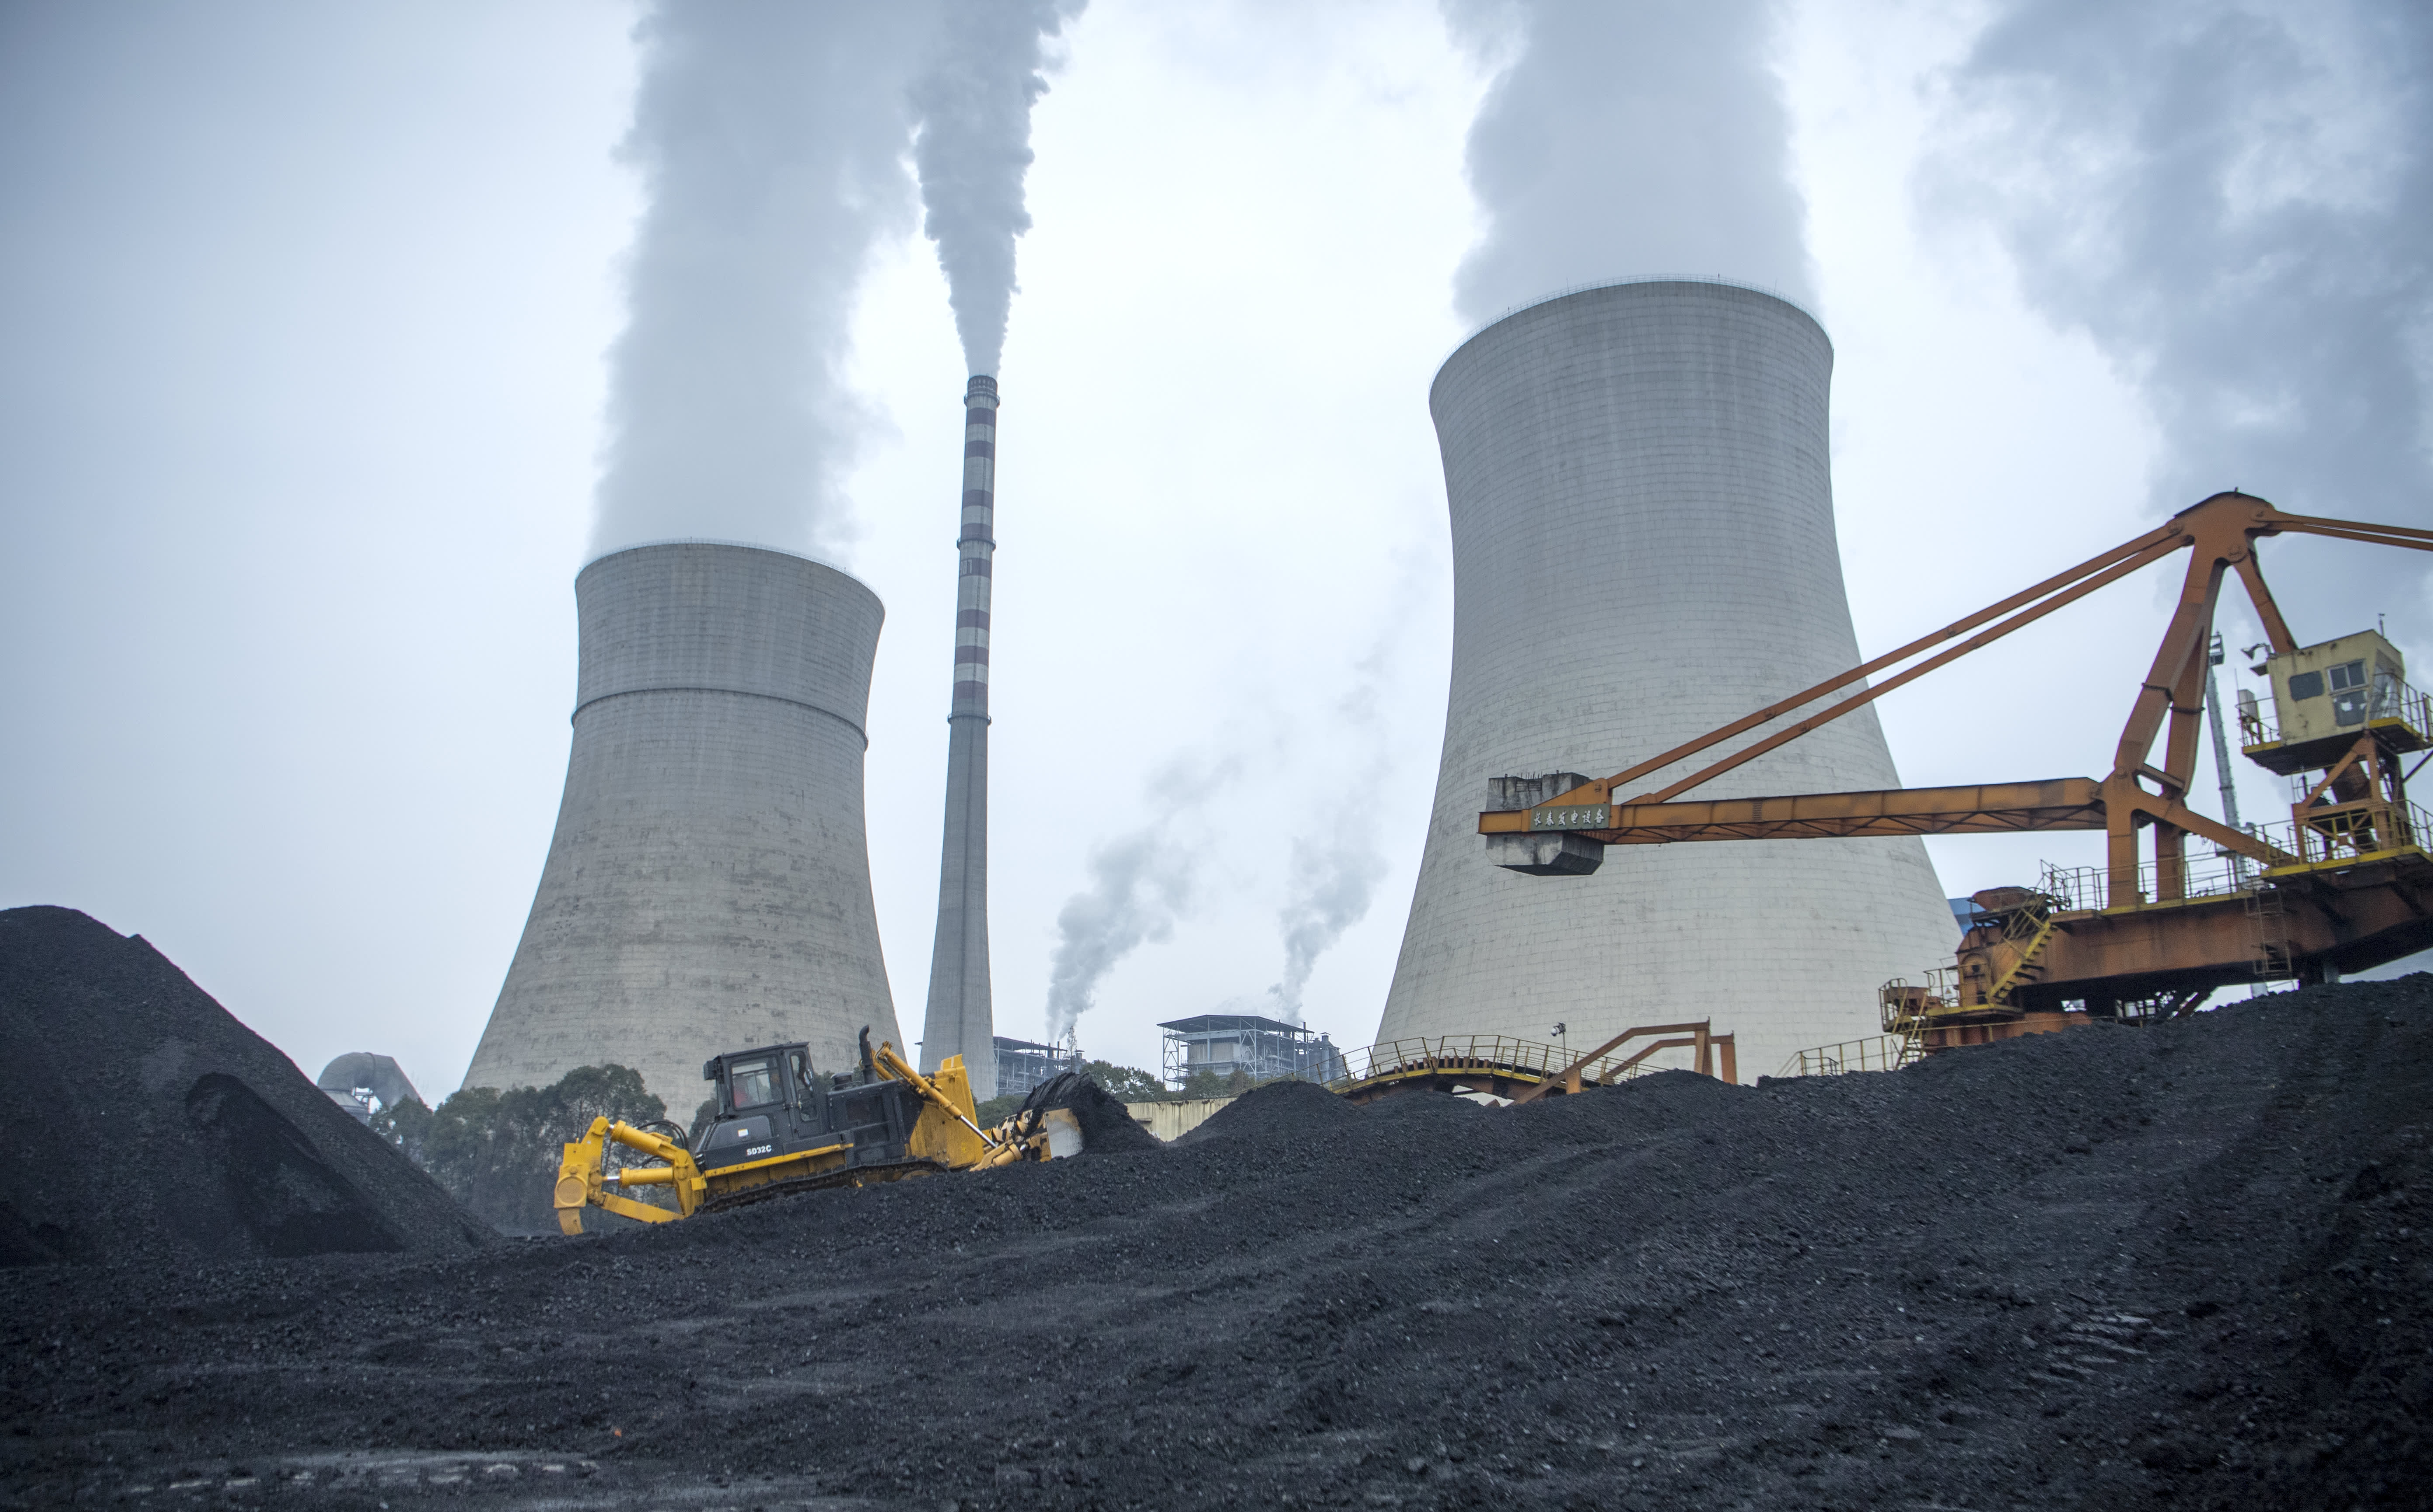 Research shows how banks, investors finance the coal industry